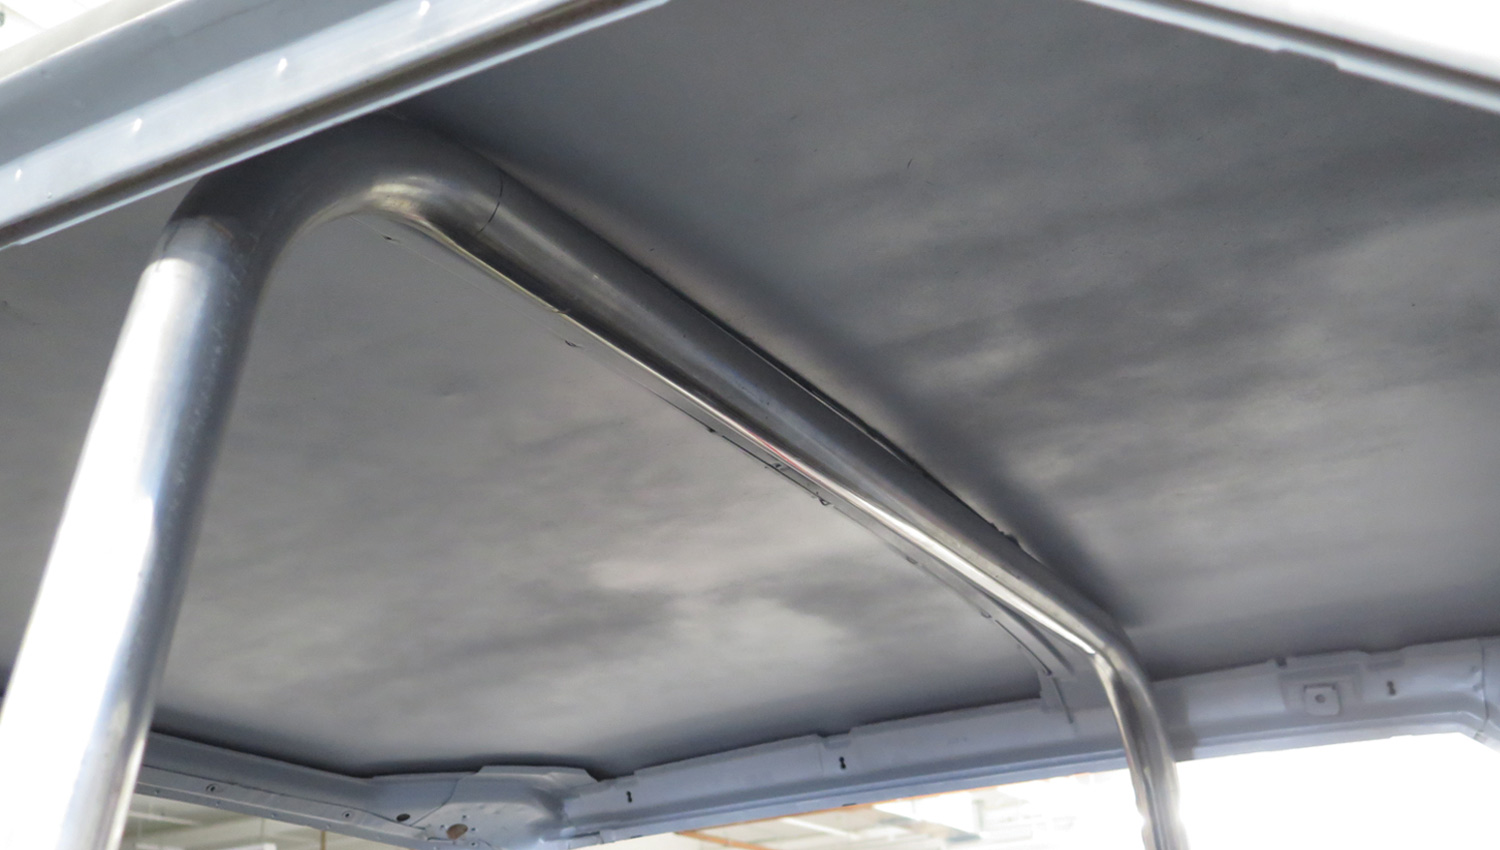 view of rollerbar/harness tube installed inside car